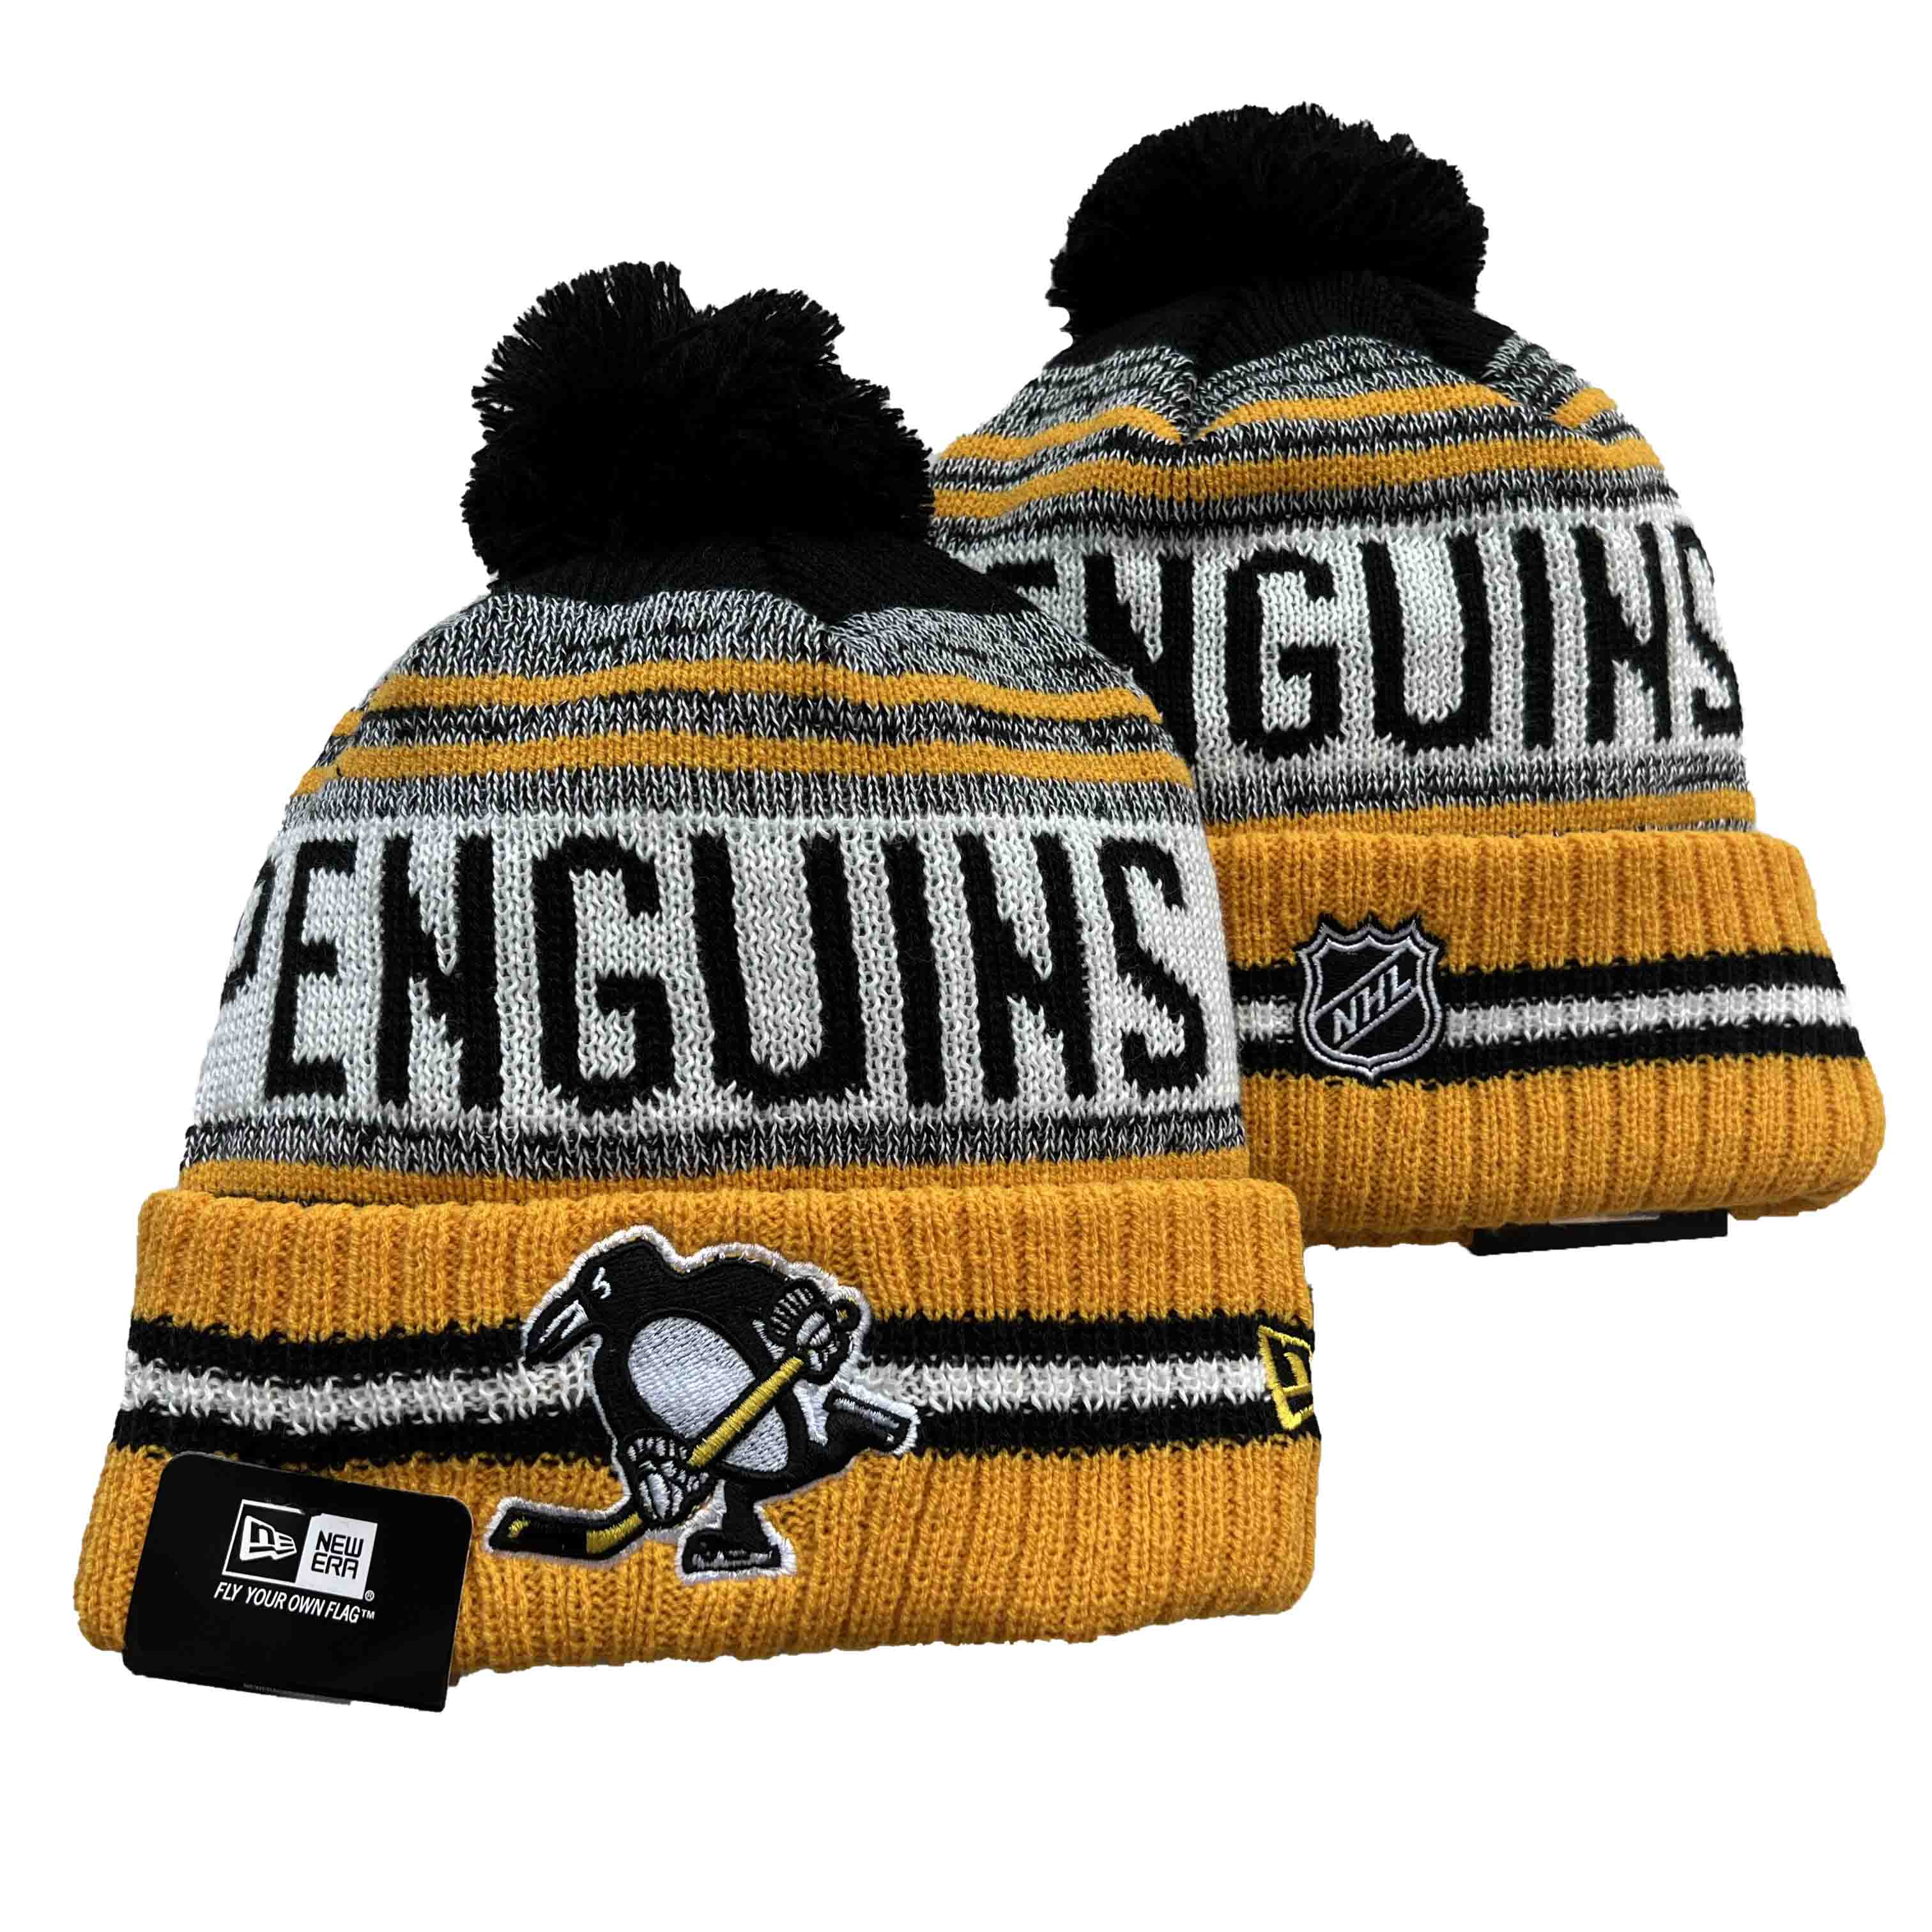 NHL Pittsburgh Penguins Beanies Knit Hats-YD1589